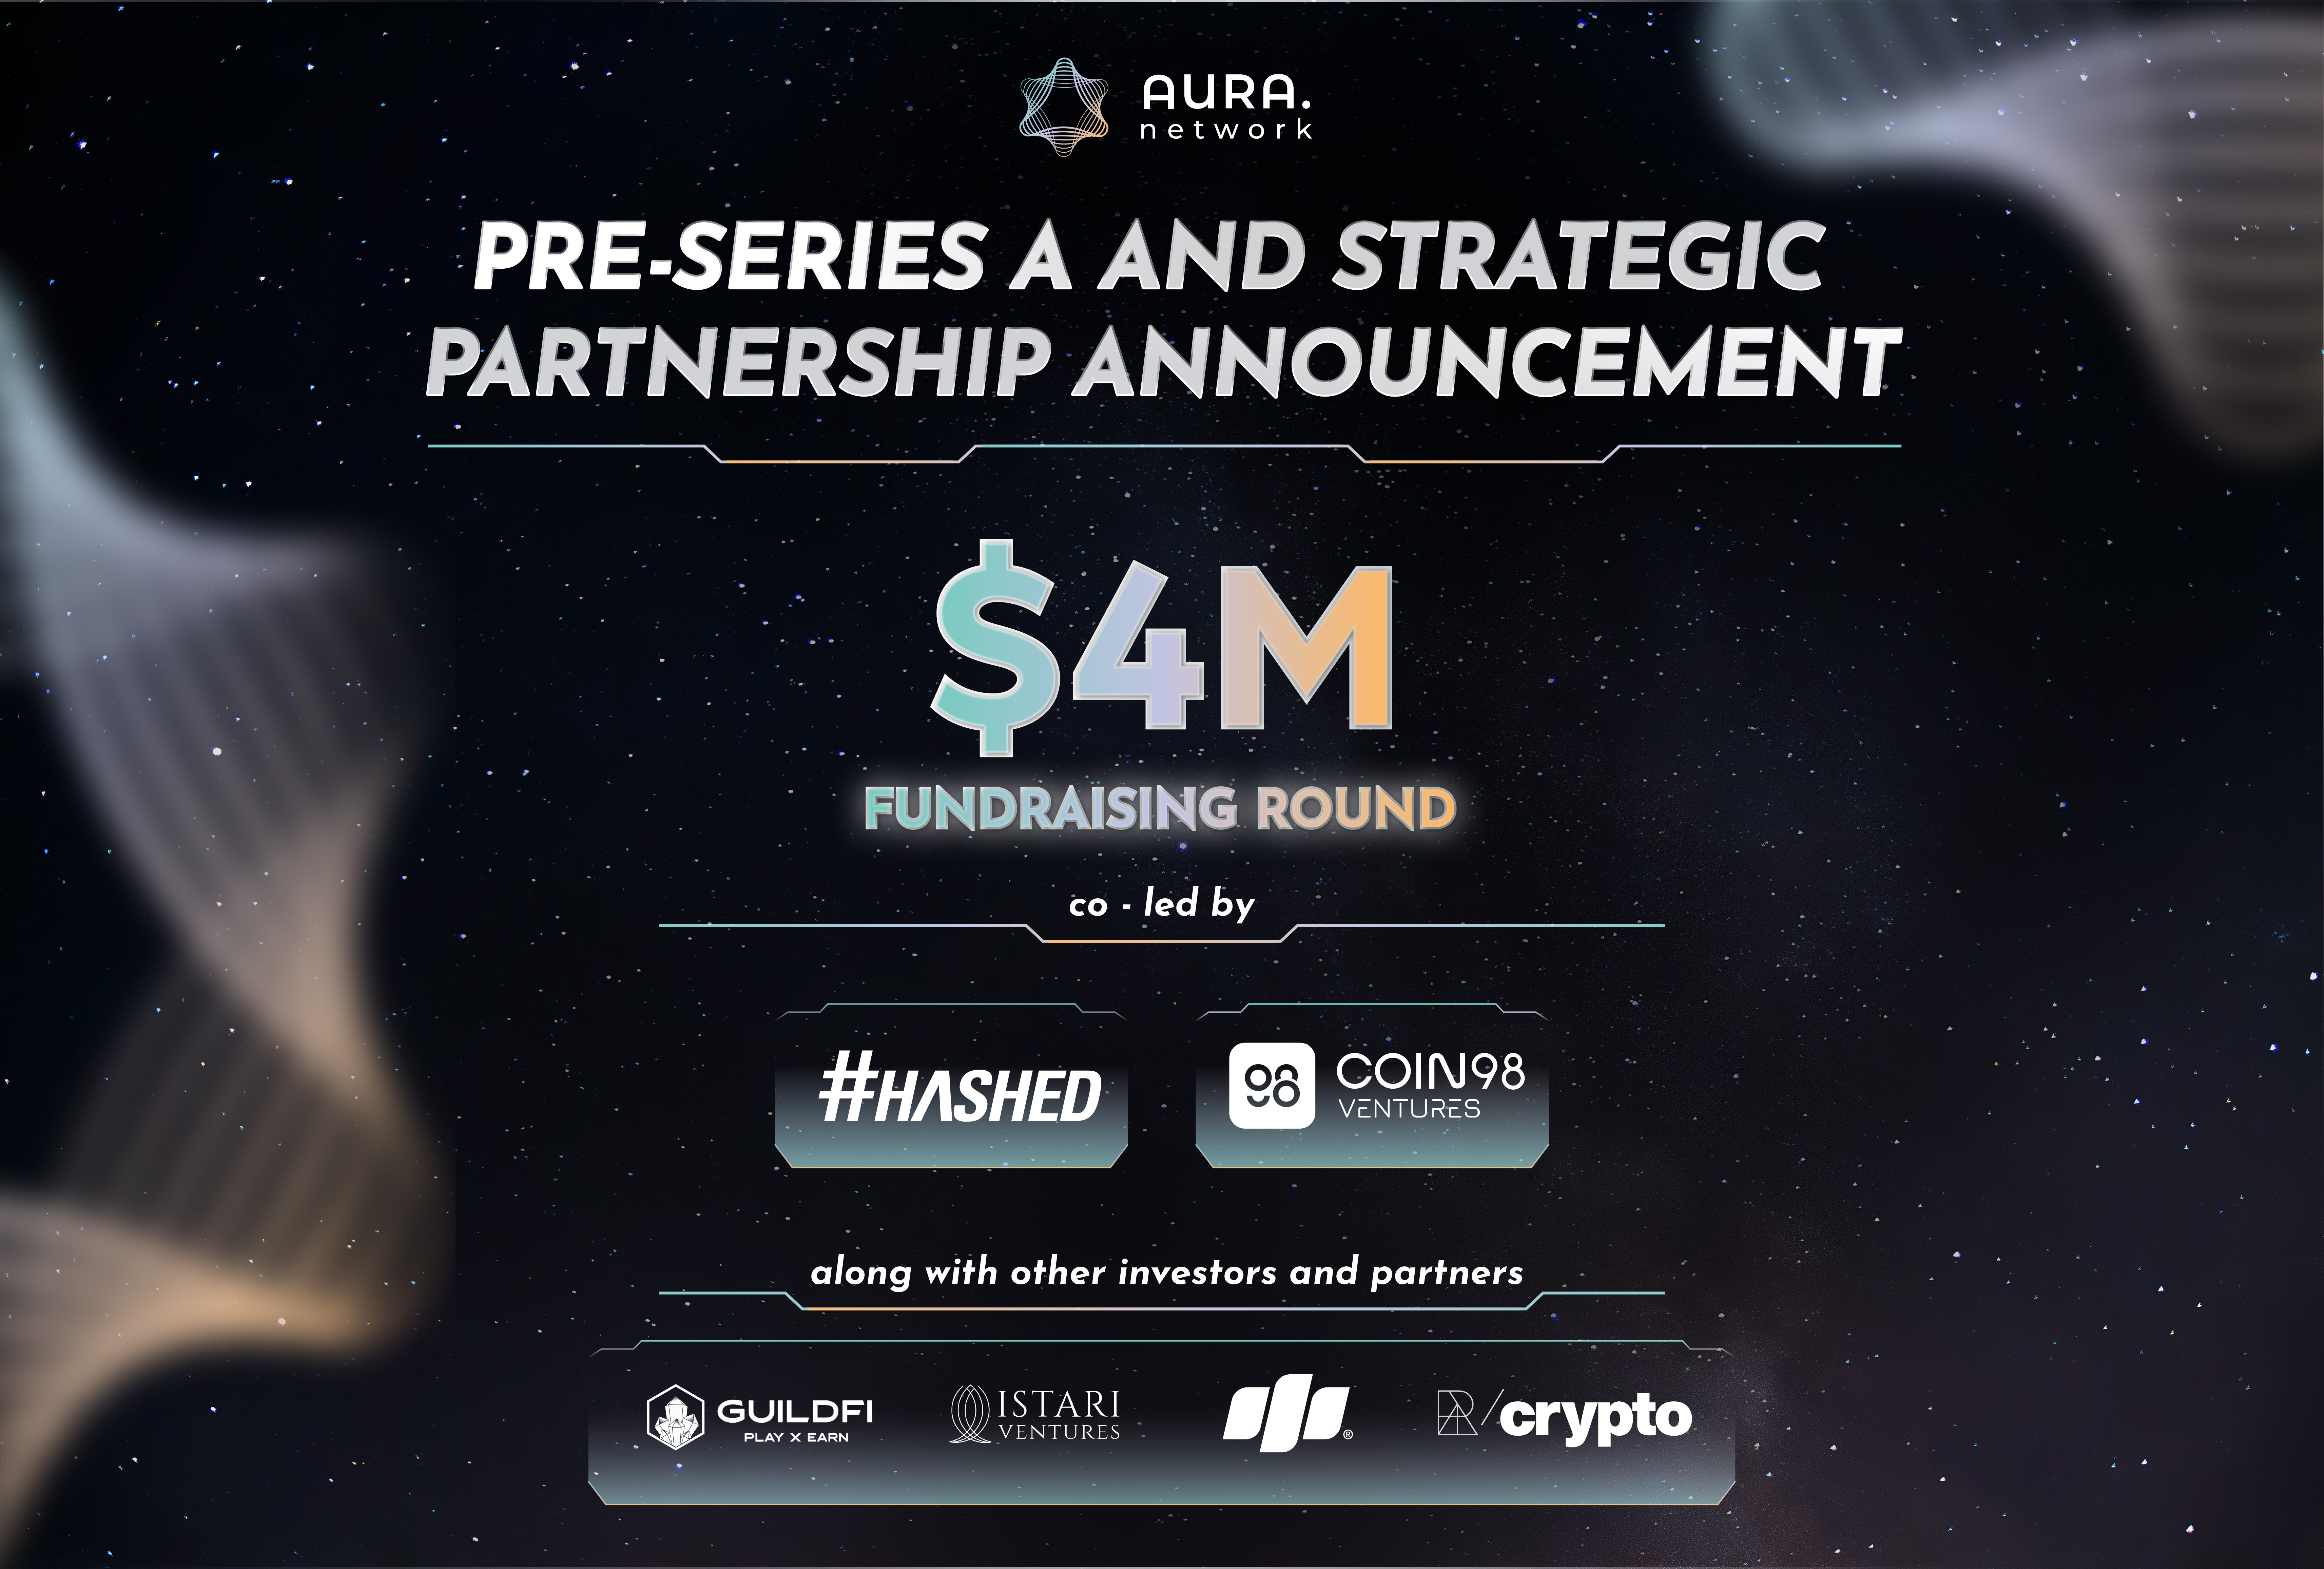 Aura Network Raised $4M in Pre-Series A Funding Round Led by Hashed and  Coin98